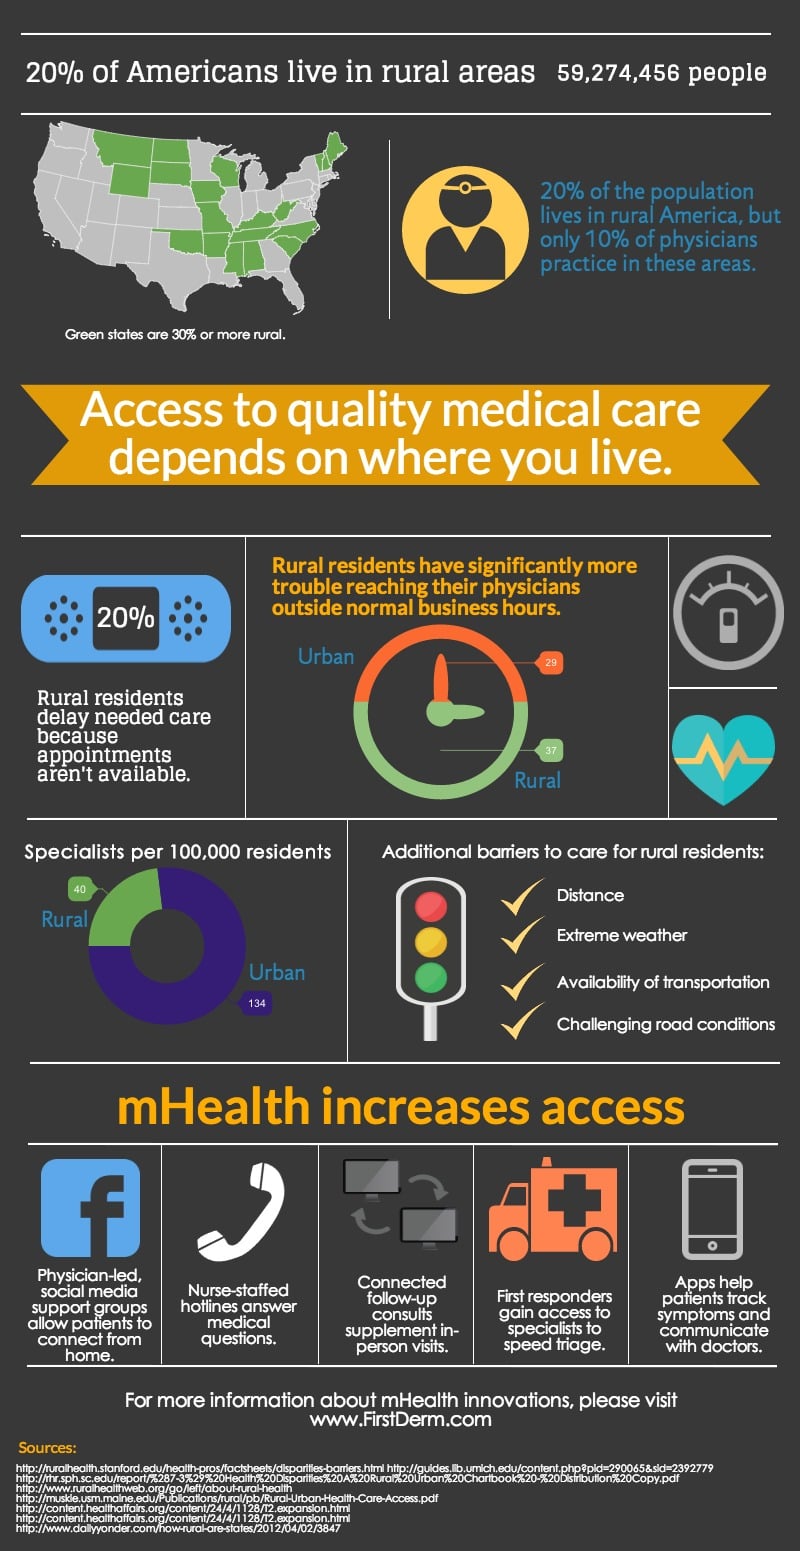 mHealth increases access to care